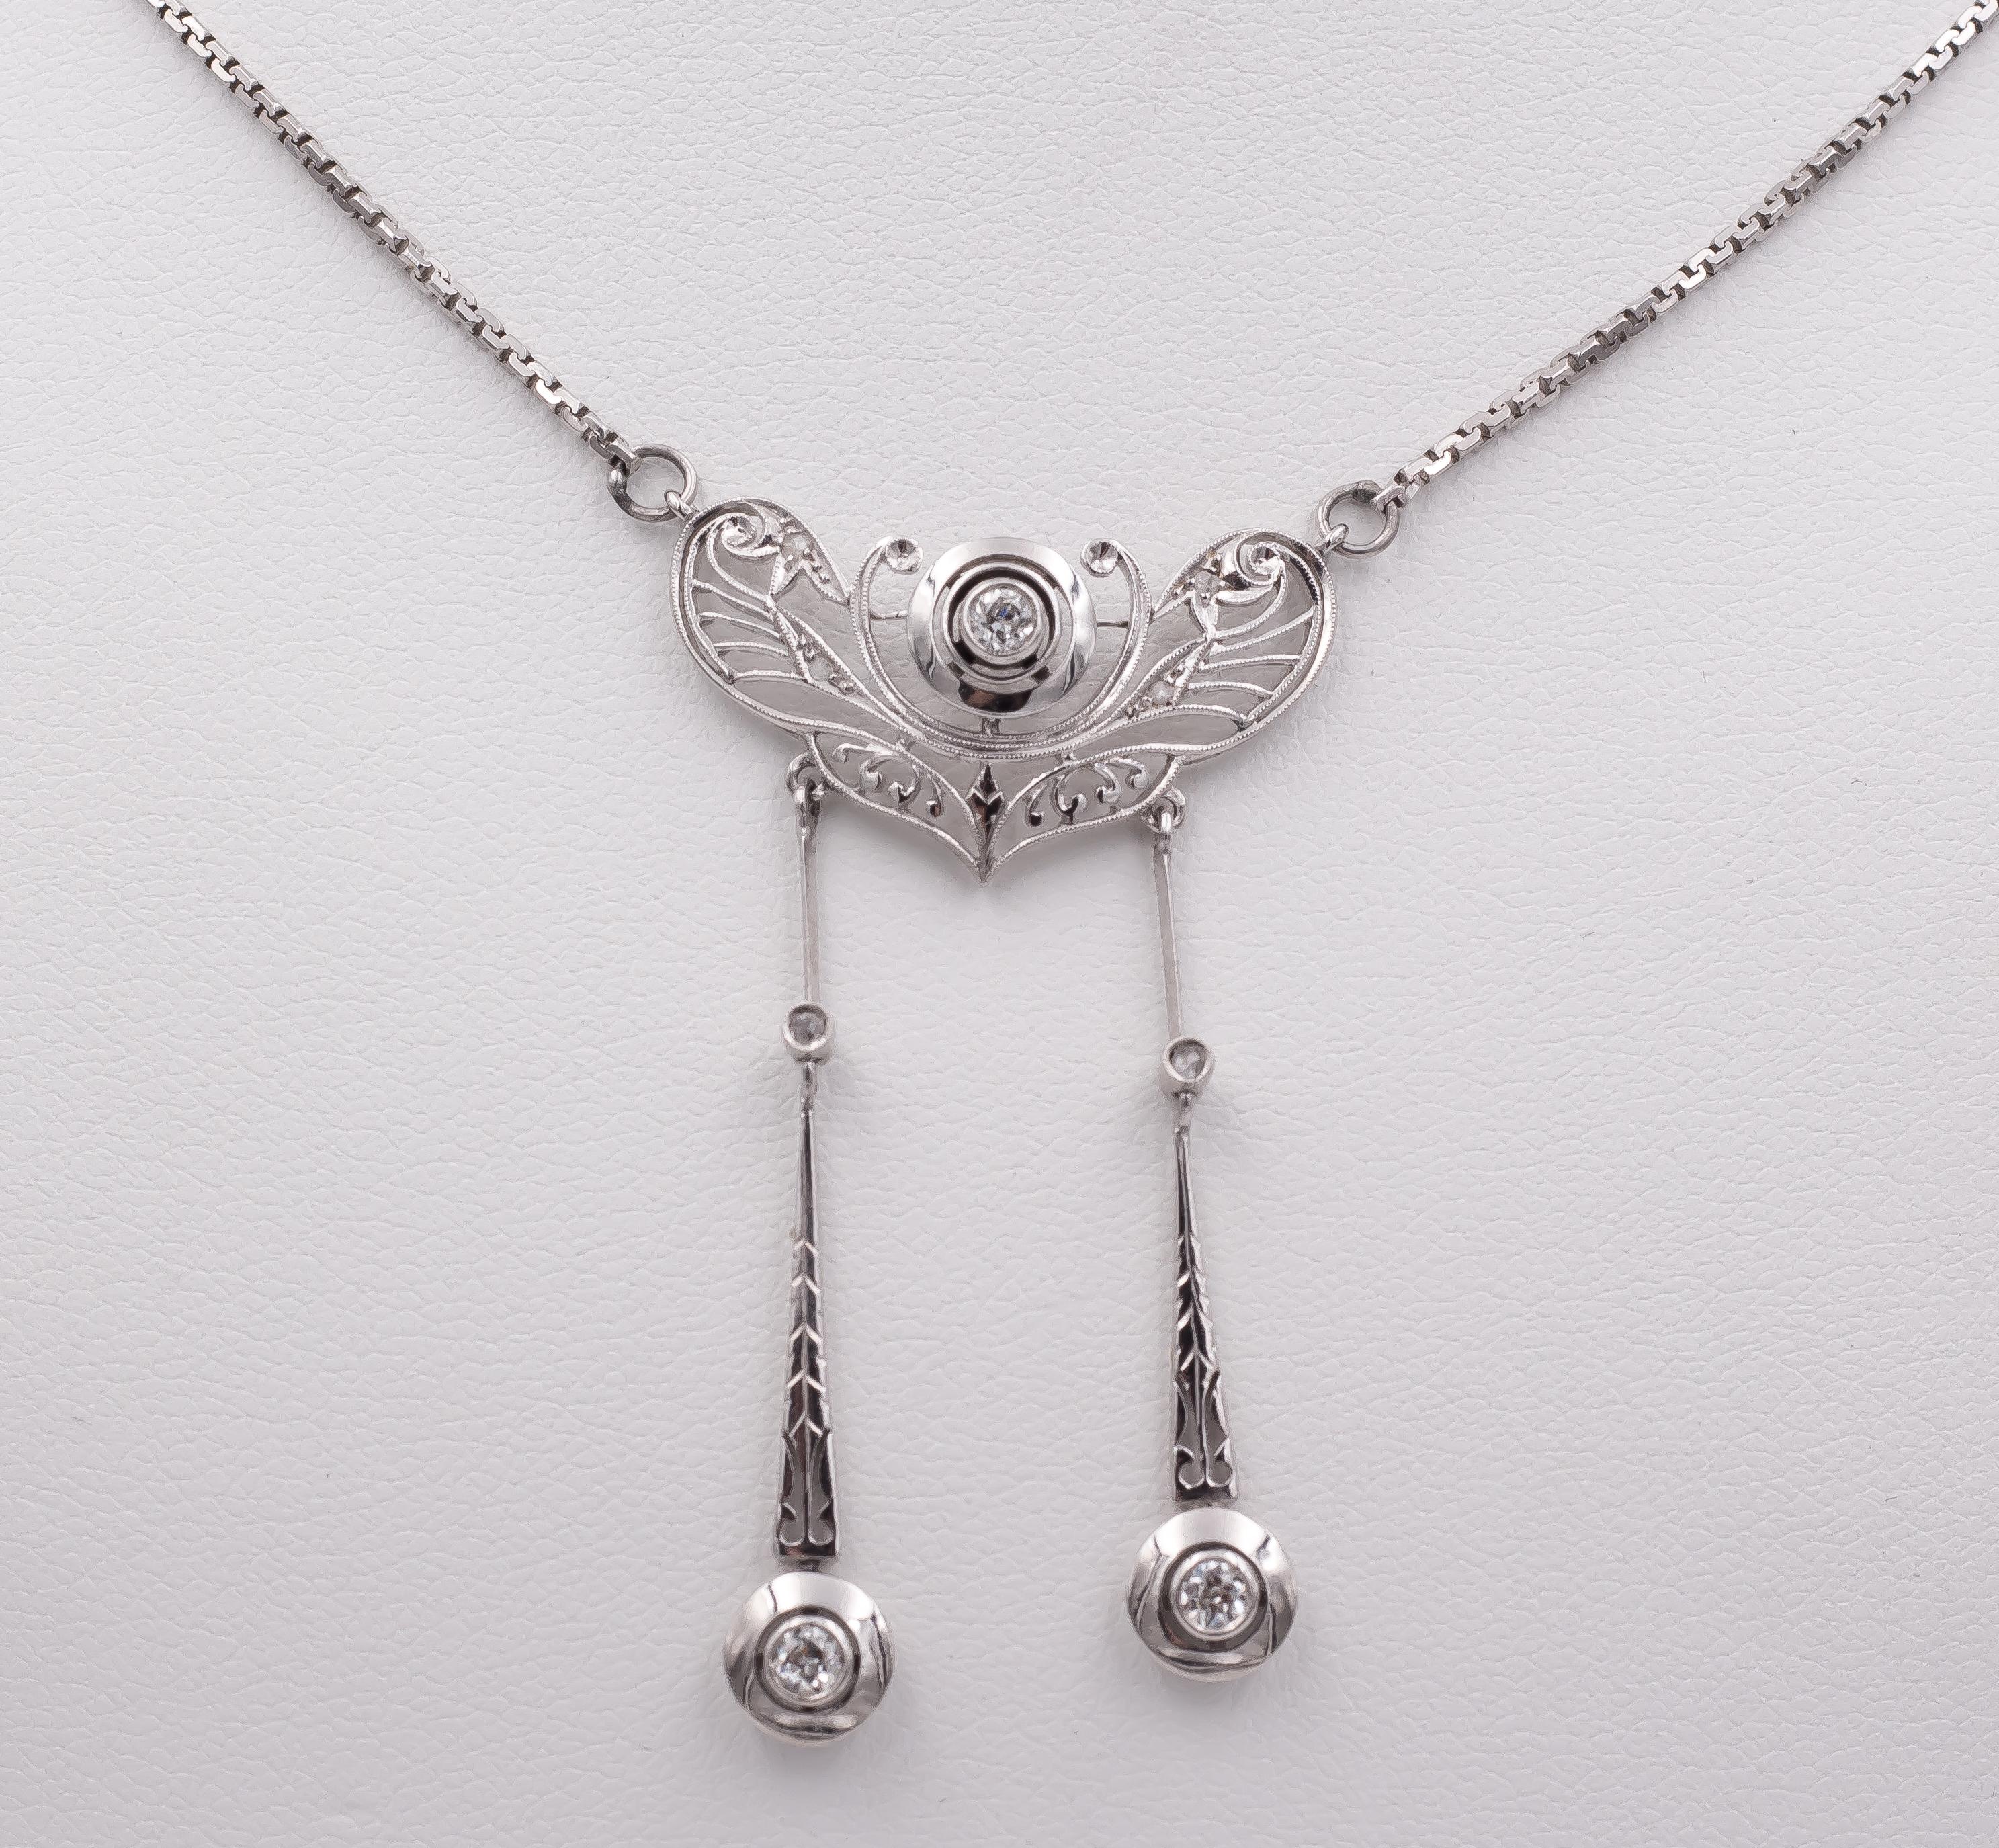 A particular antique necklace, dating from the early 20th Century.
This necklace is very refined and elegant: its main section is butterfly shaped, decorated with a central diamond, with two articulated drops diamond beneath, of two different